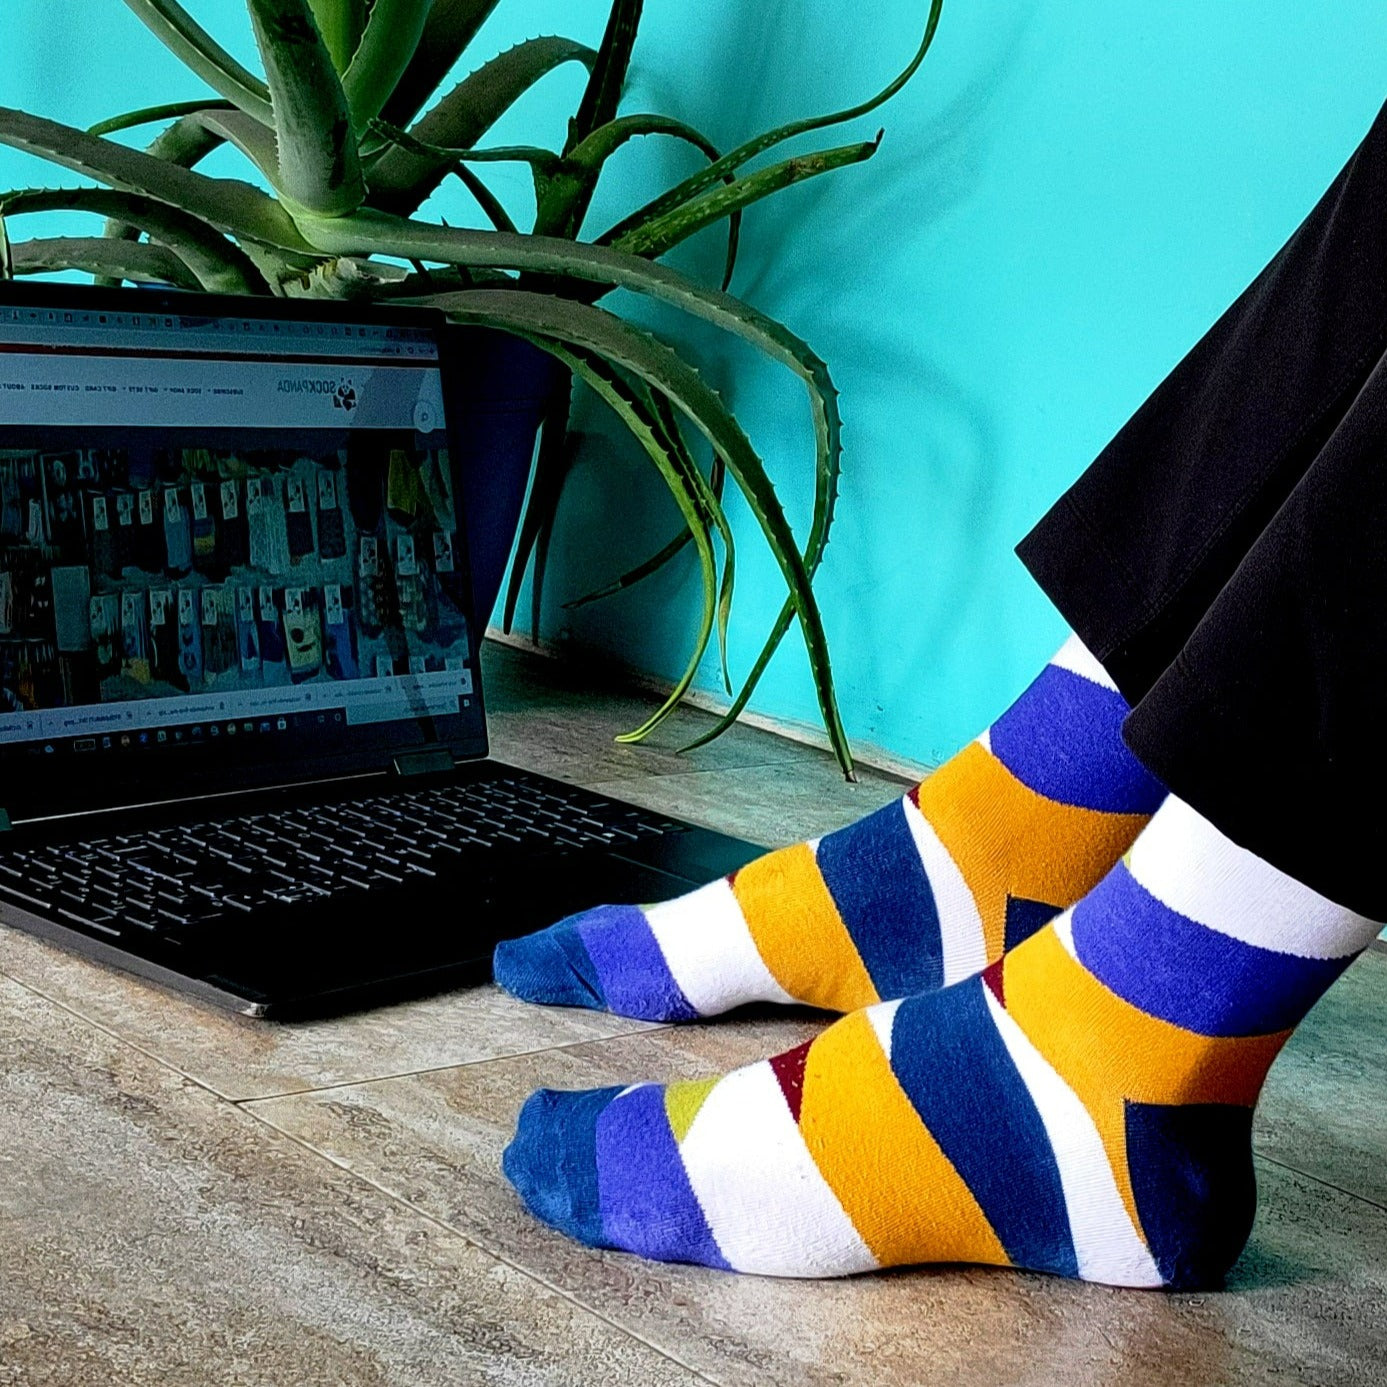 Stylish and Funky Striped Pattern Socks from the Sock Panda